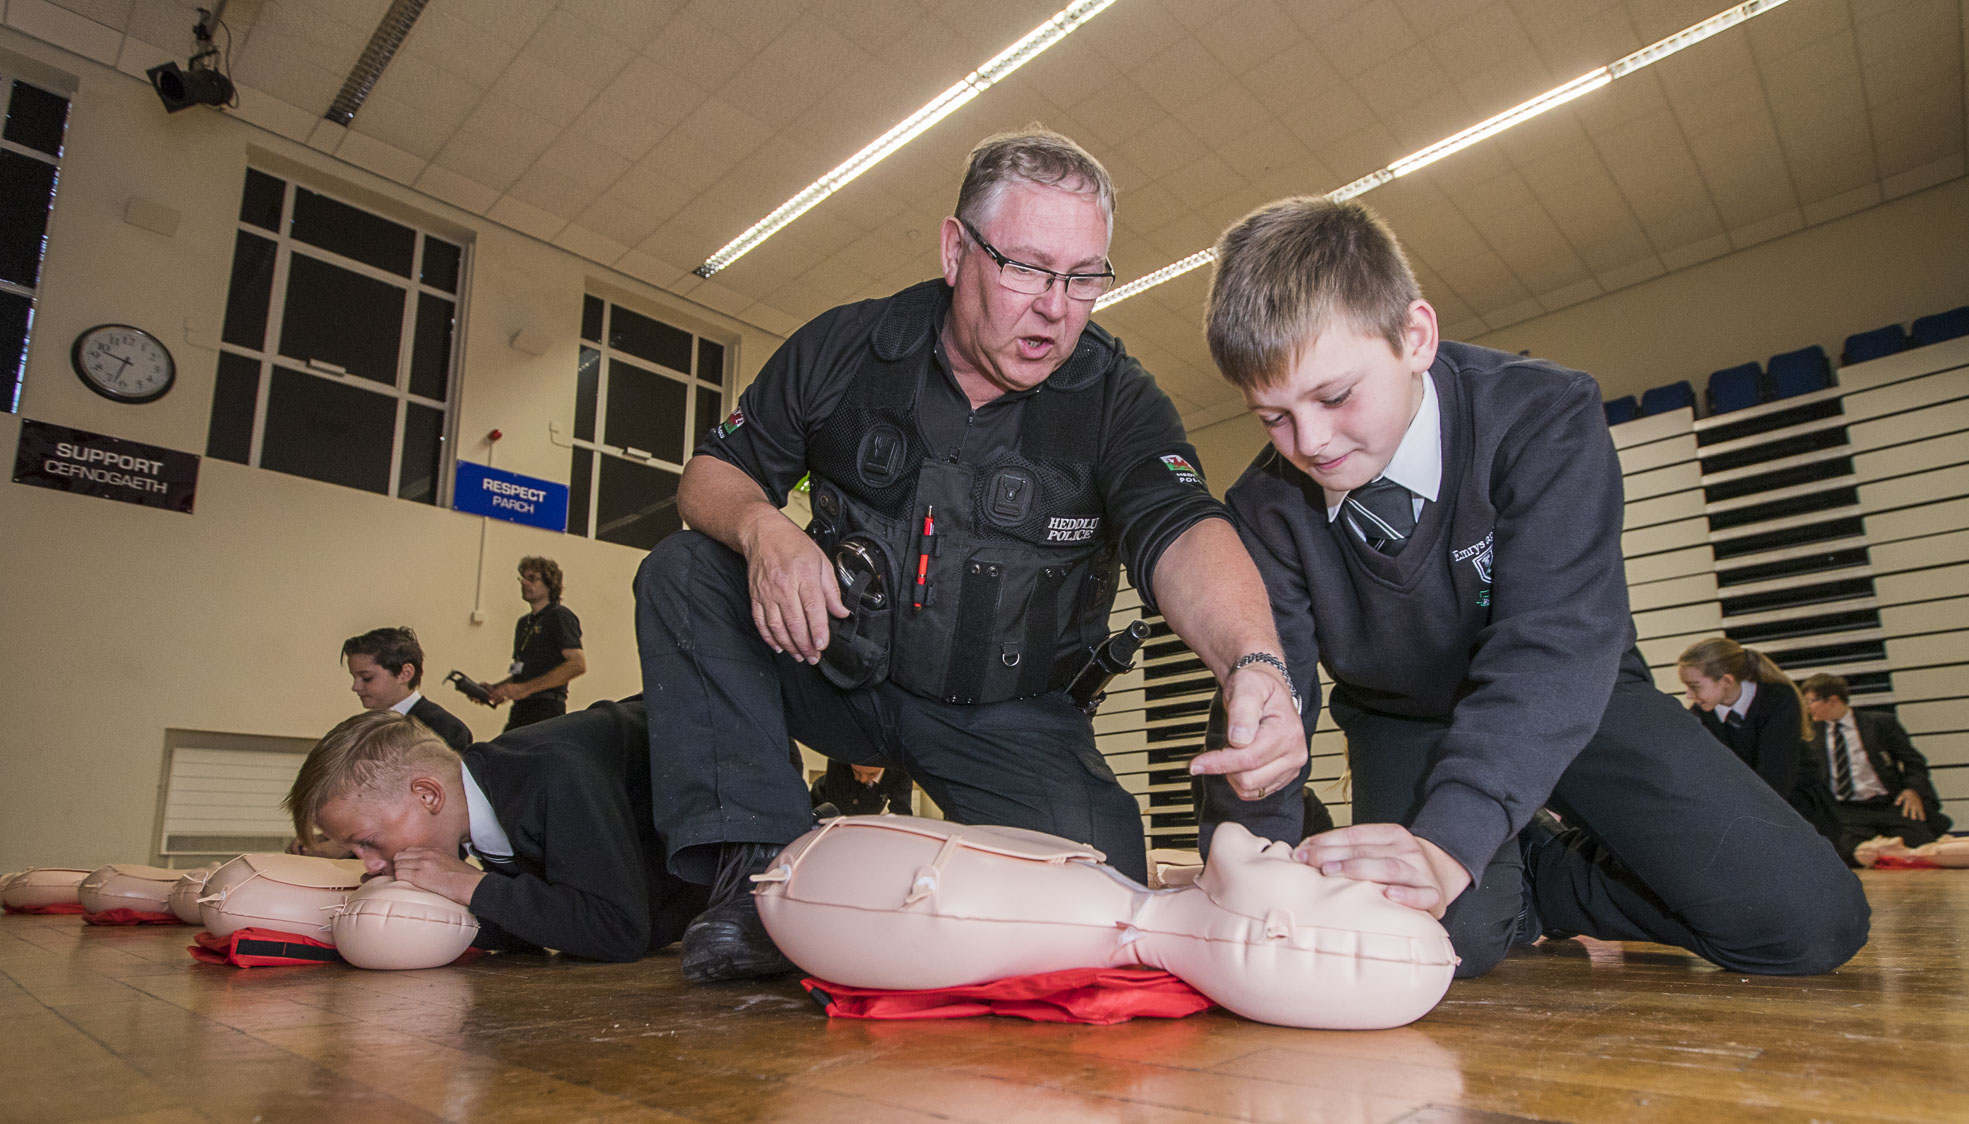 Lifesaving skills lesson of the day for Abergele youngsters